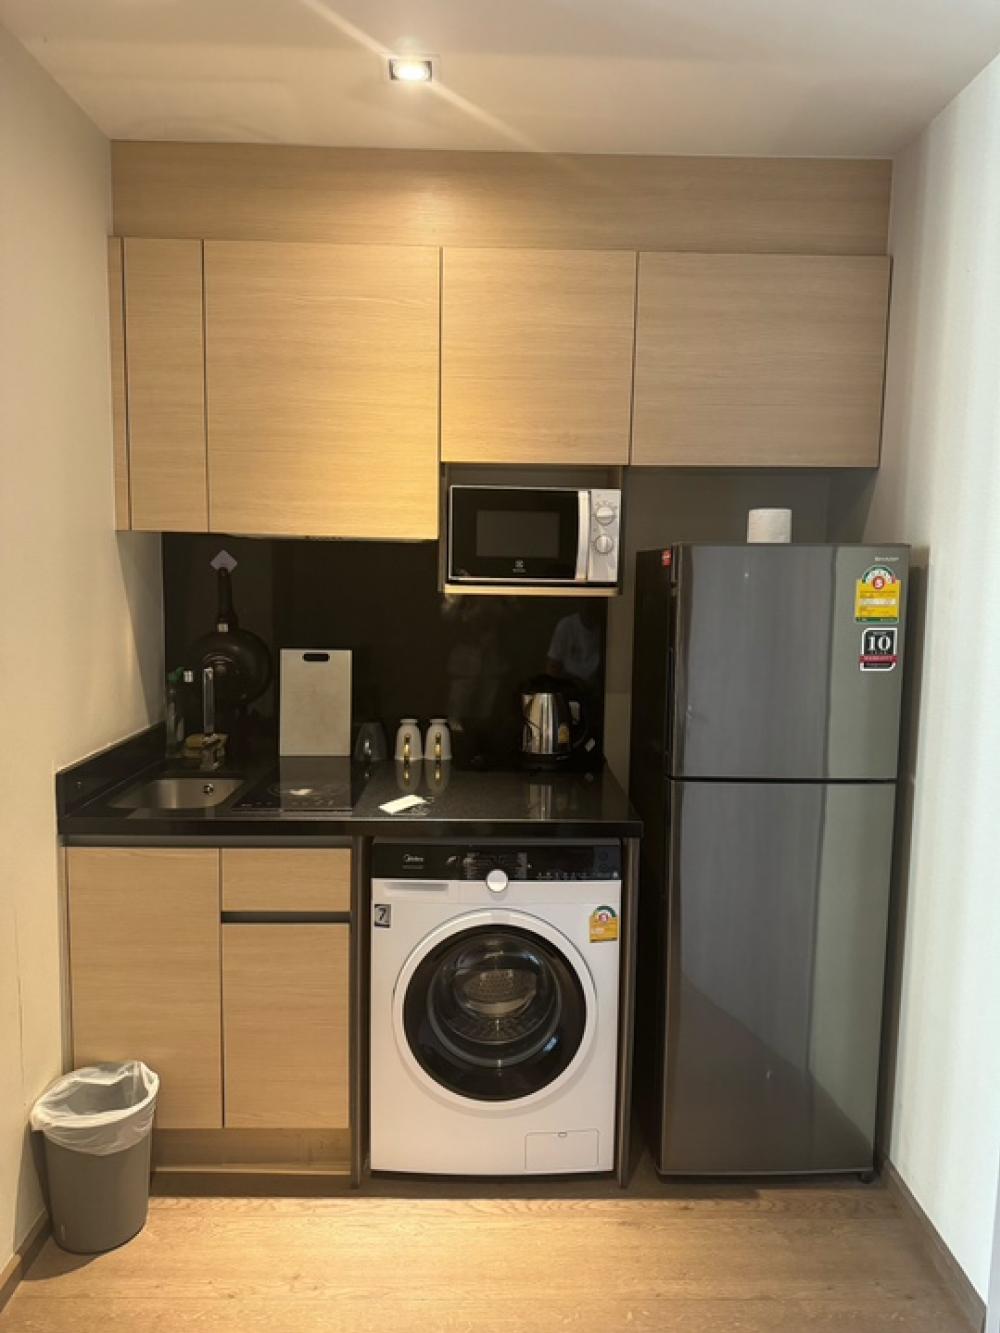 For RentCondoSukhumvit, Asoke, Thonglor : ♥️♥️Urgent for rent, ready to move in, Park 24, Park Origin Condo, Phrom Phong, beautiful room, fully decorated. Fully furnished and electrical appliances, ready to move in. If interested, please make an appointment to view immediately. 🥰🥰Welcome.